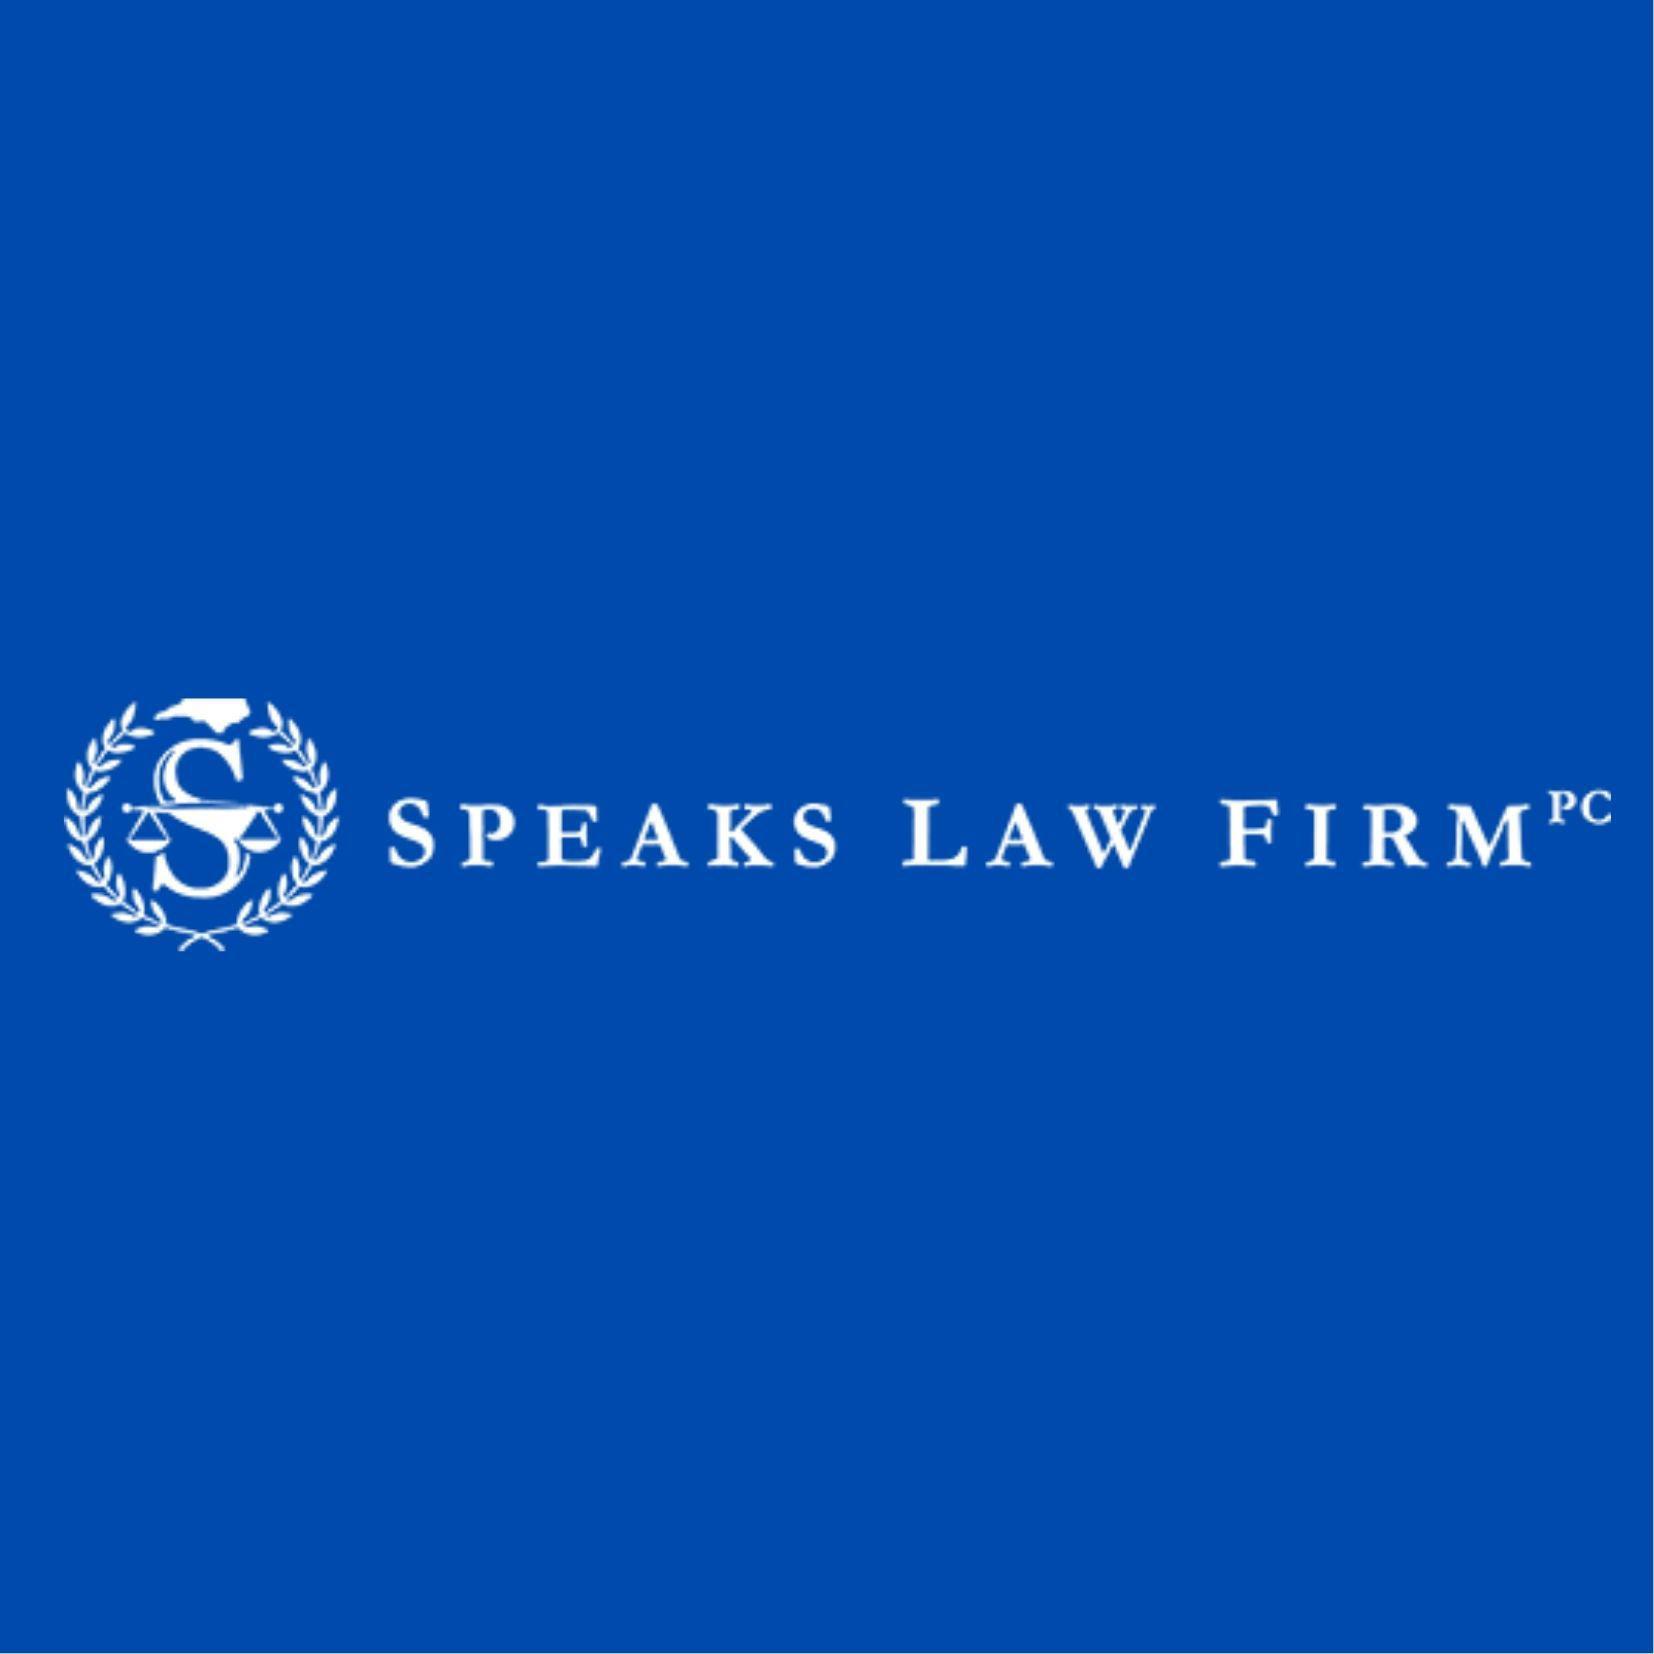 Speaks Law Firm - Charlotte, NC 28204 - (980)237-6948 | ShowMeLocal.com